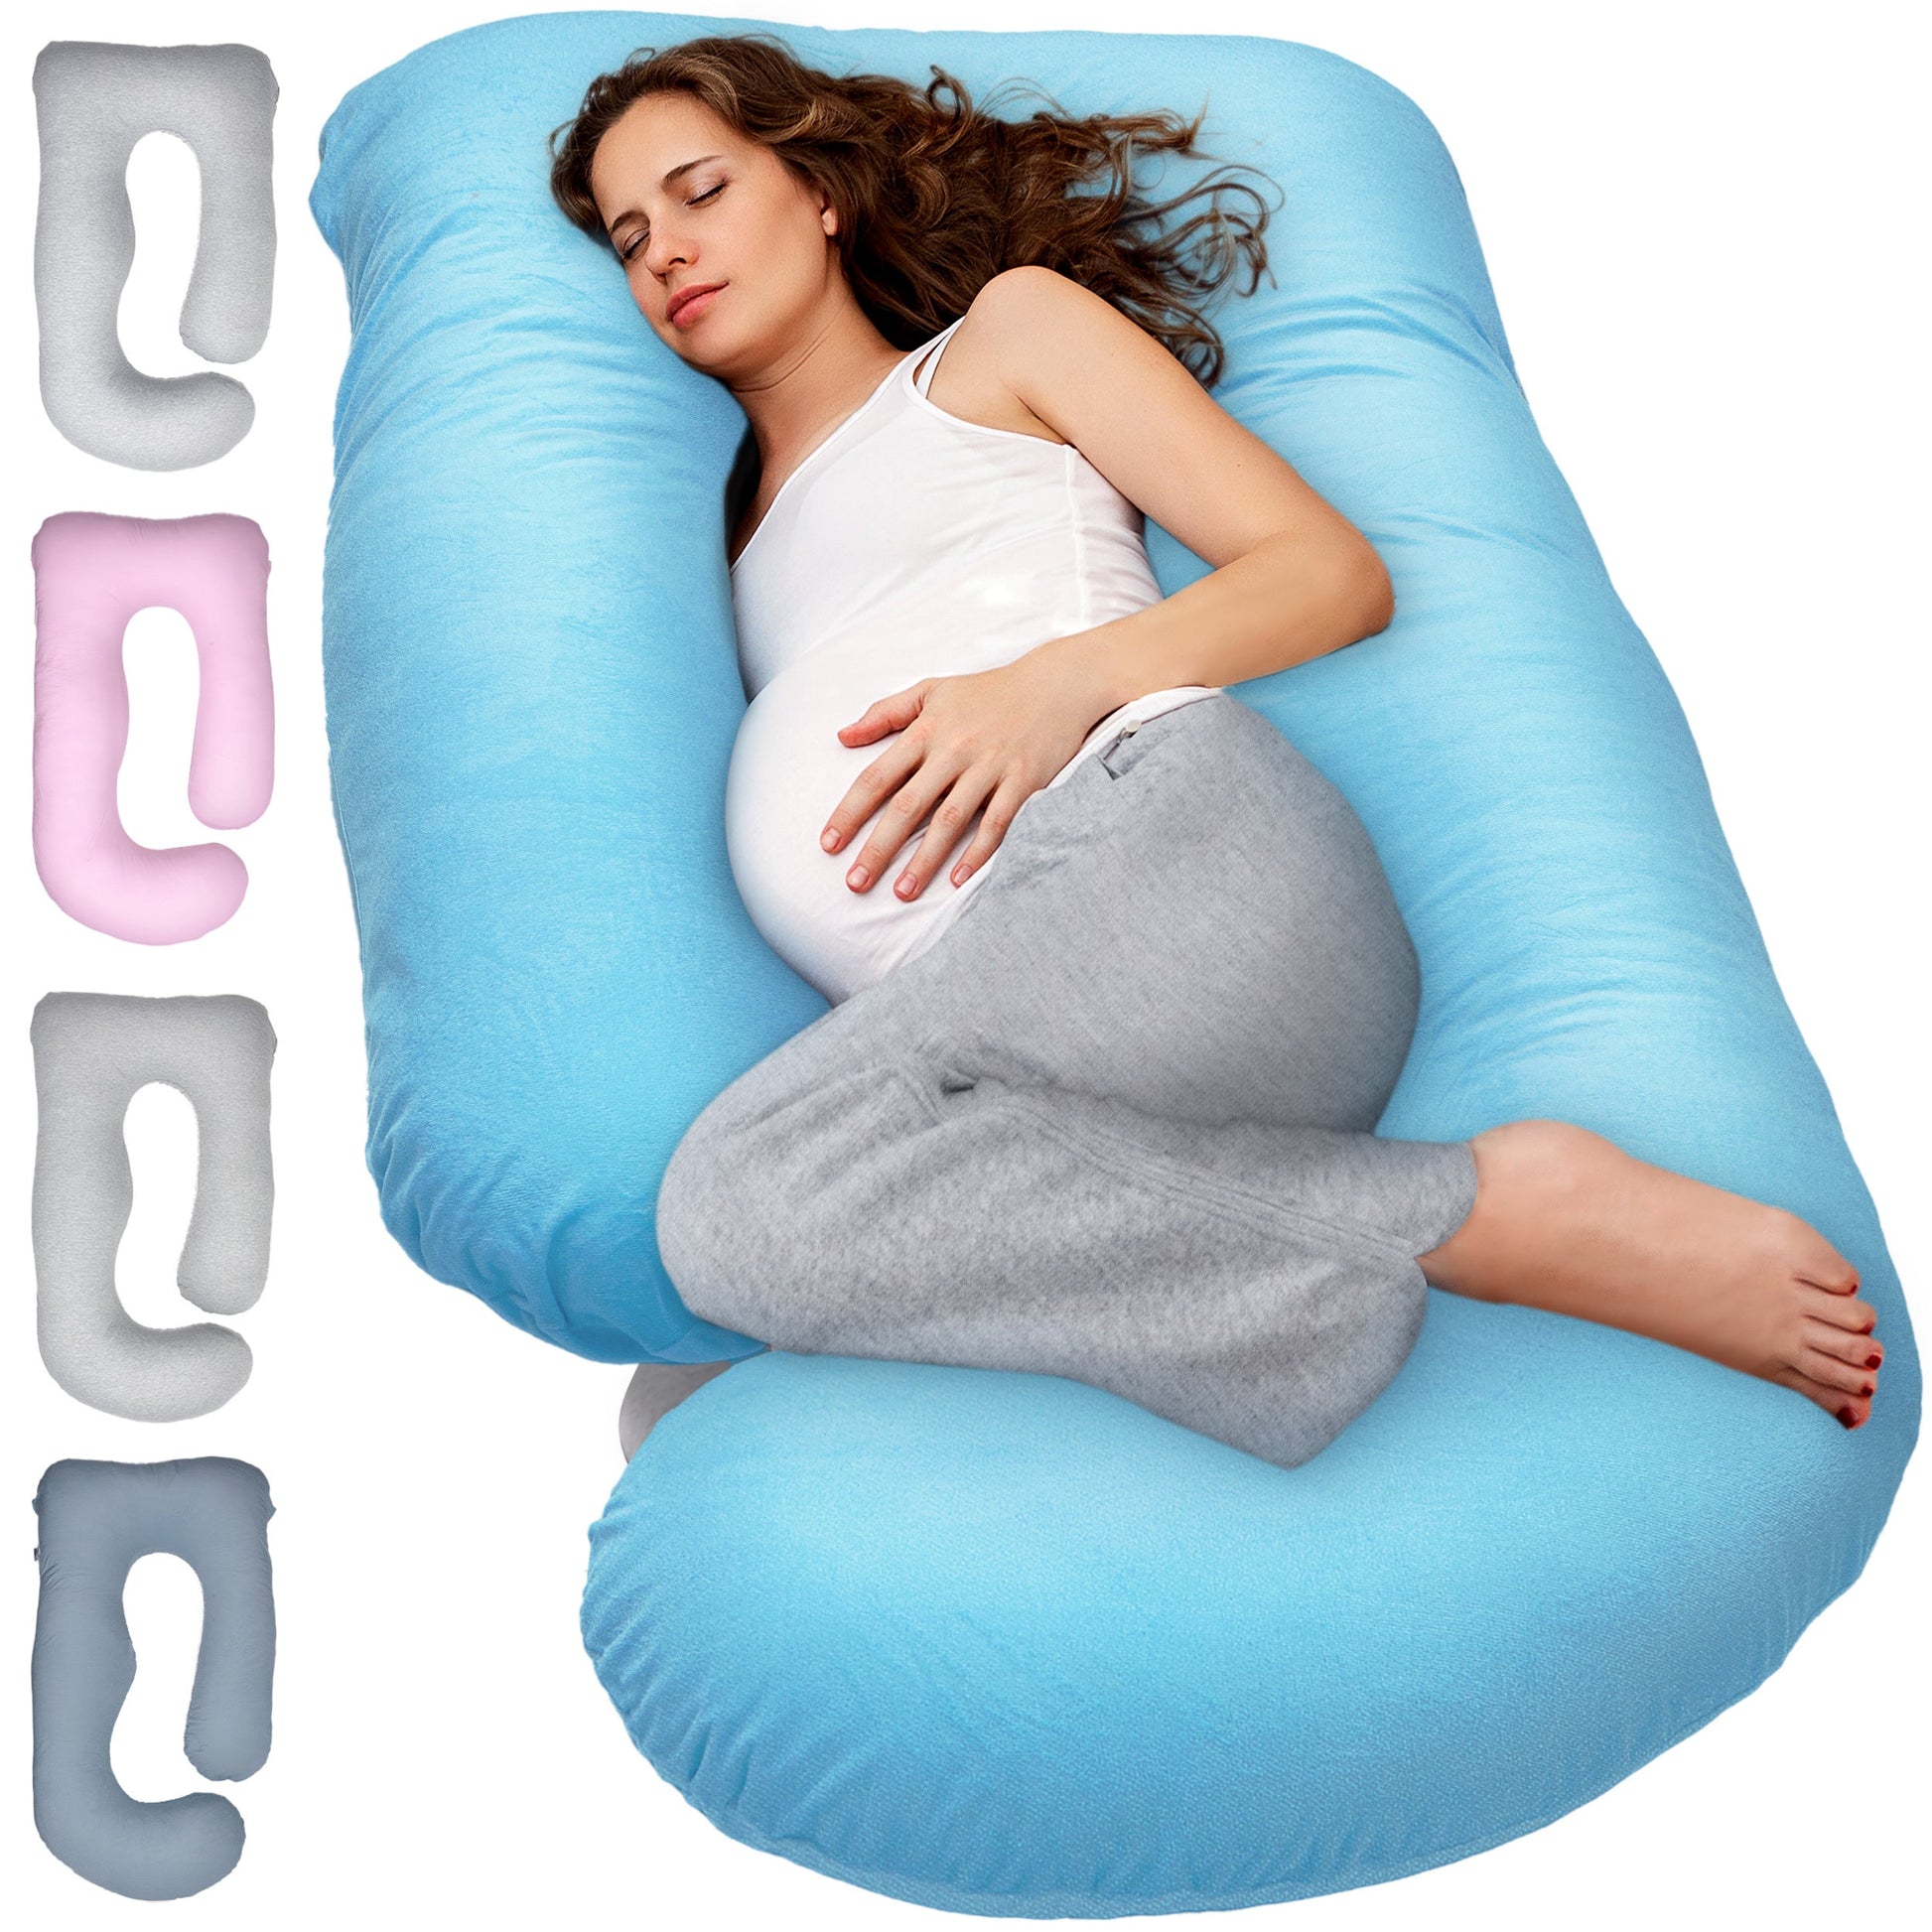 Momcozy Pregnancy Pillows for Sleeping, U Shaped Full Body Maternity Pillow  with Removable Cover - Support for Back, Legs, Belly, HIPS for Pregnant